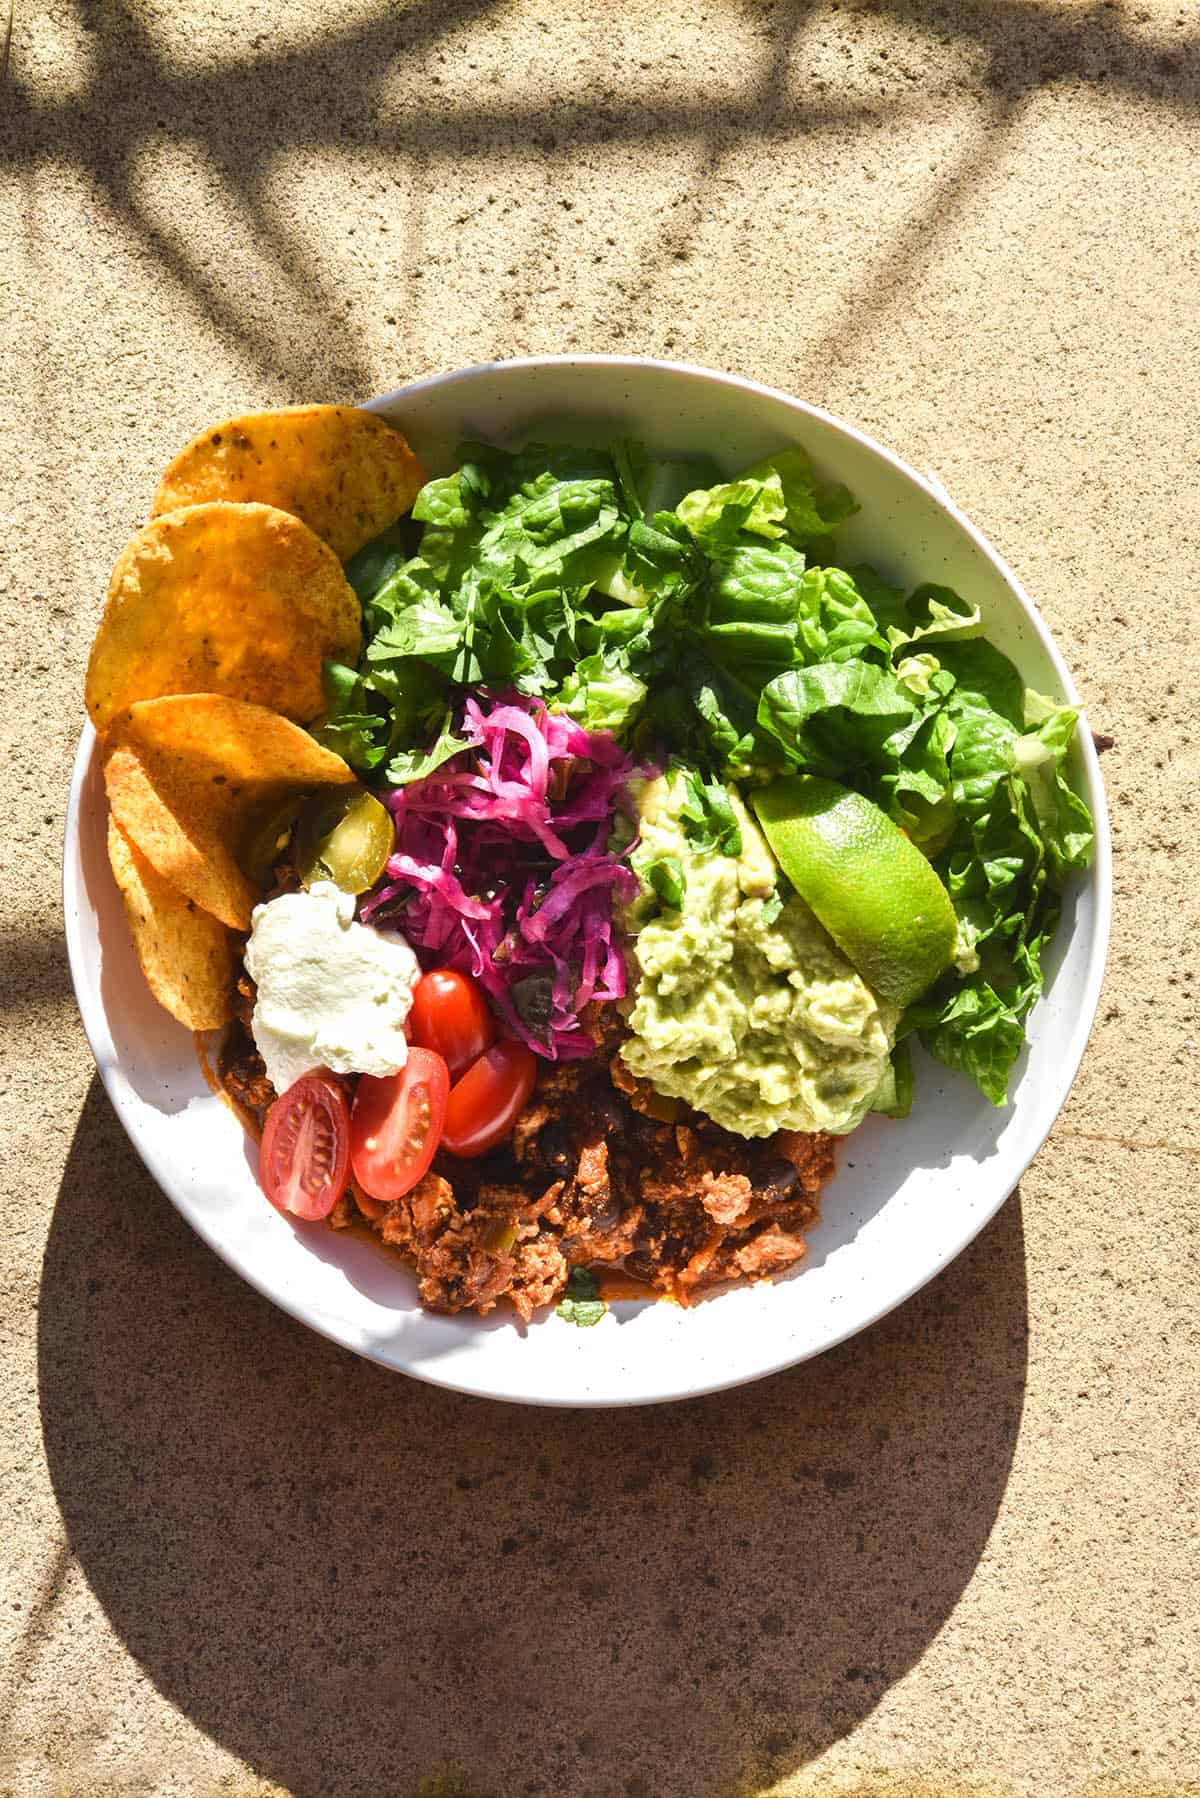 An aerial brightly lit view of a plate of FODMAP friendly vegetarian chilli served with salad, guacamole, a wedge of lime, some fodmap friendly 'pickled red onion', corn chips, sour cream and tomatoes. It sits atop terracotta tiles in bright sunlight, with the shadow of some palm leaves in the background of the image